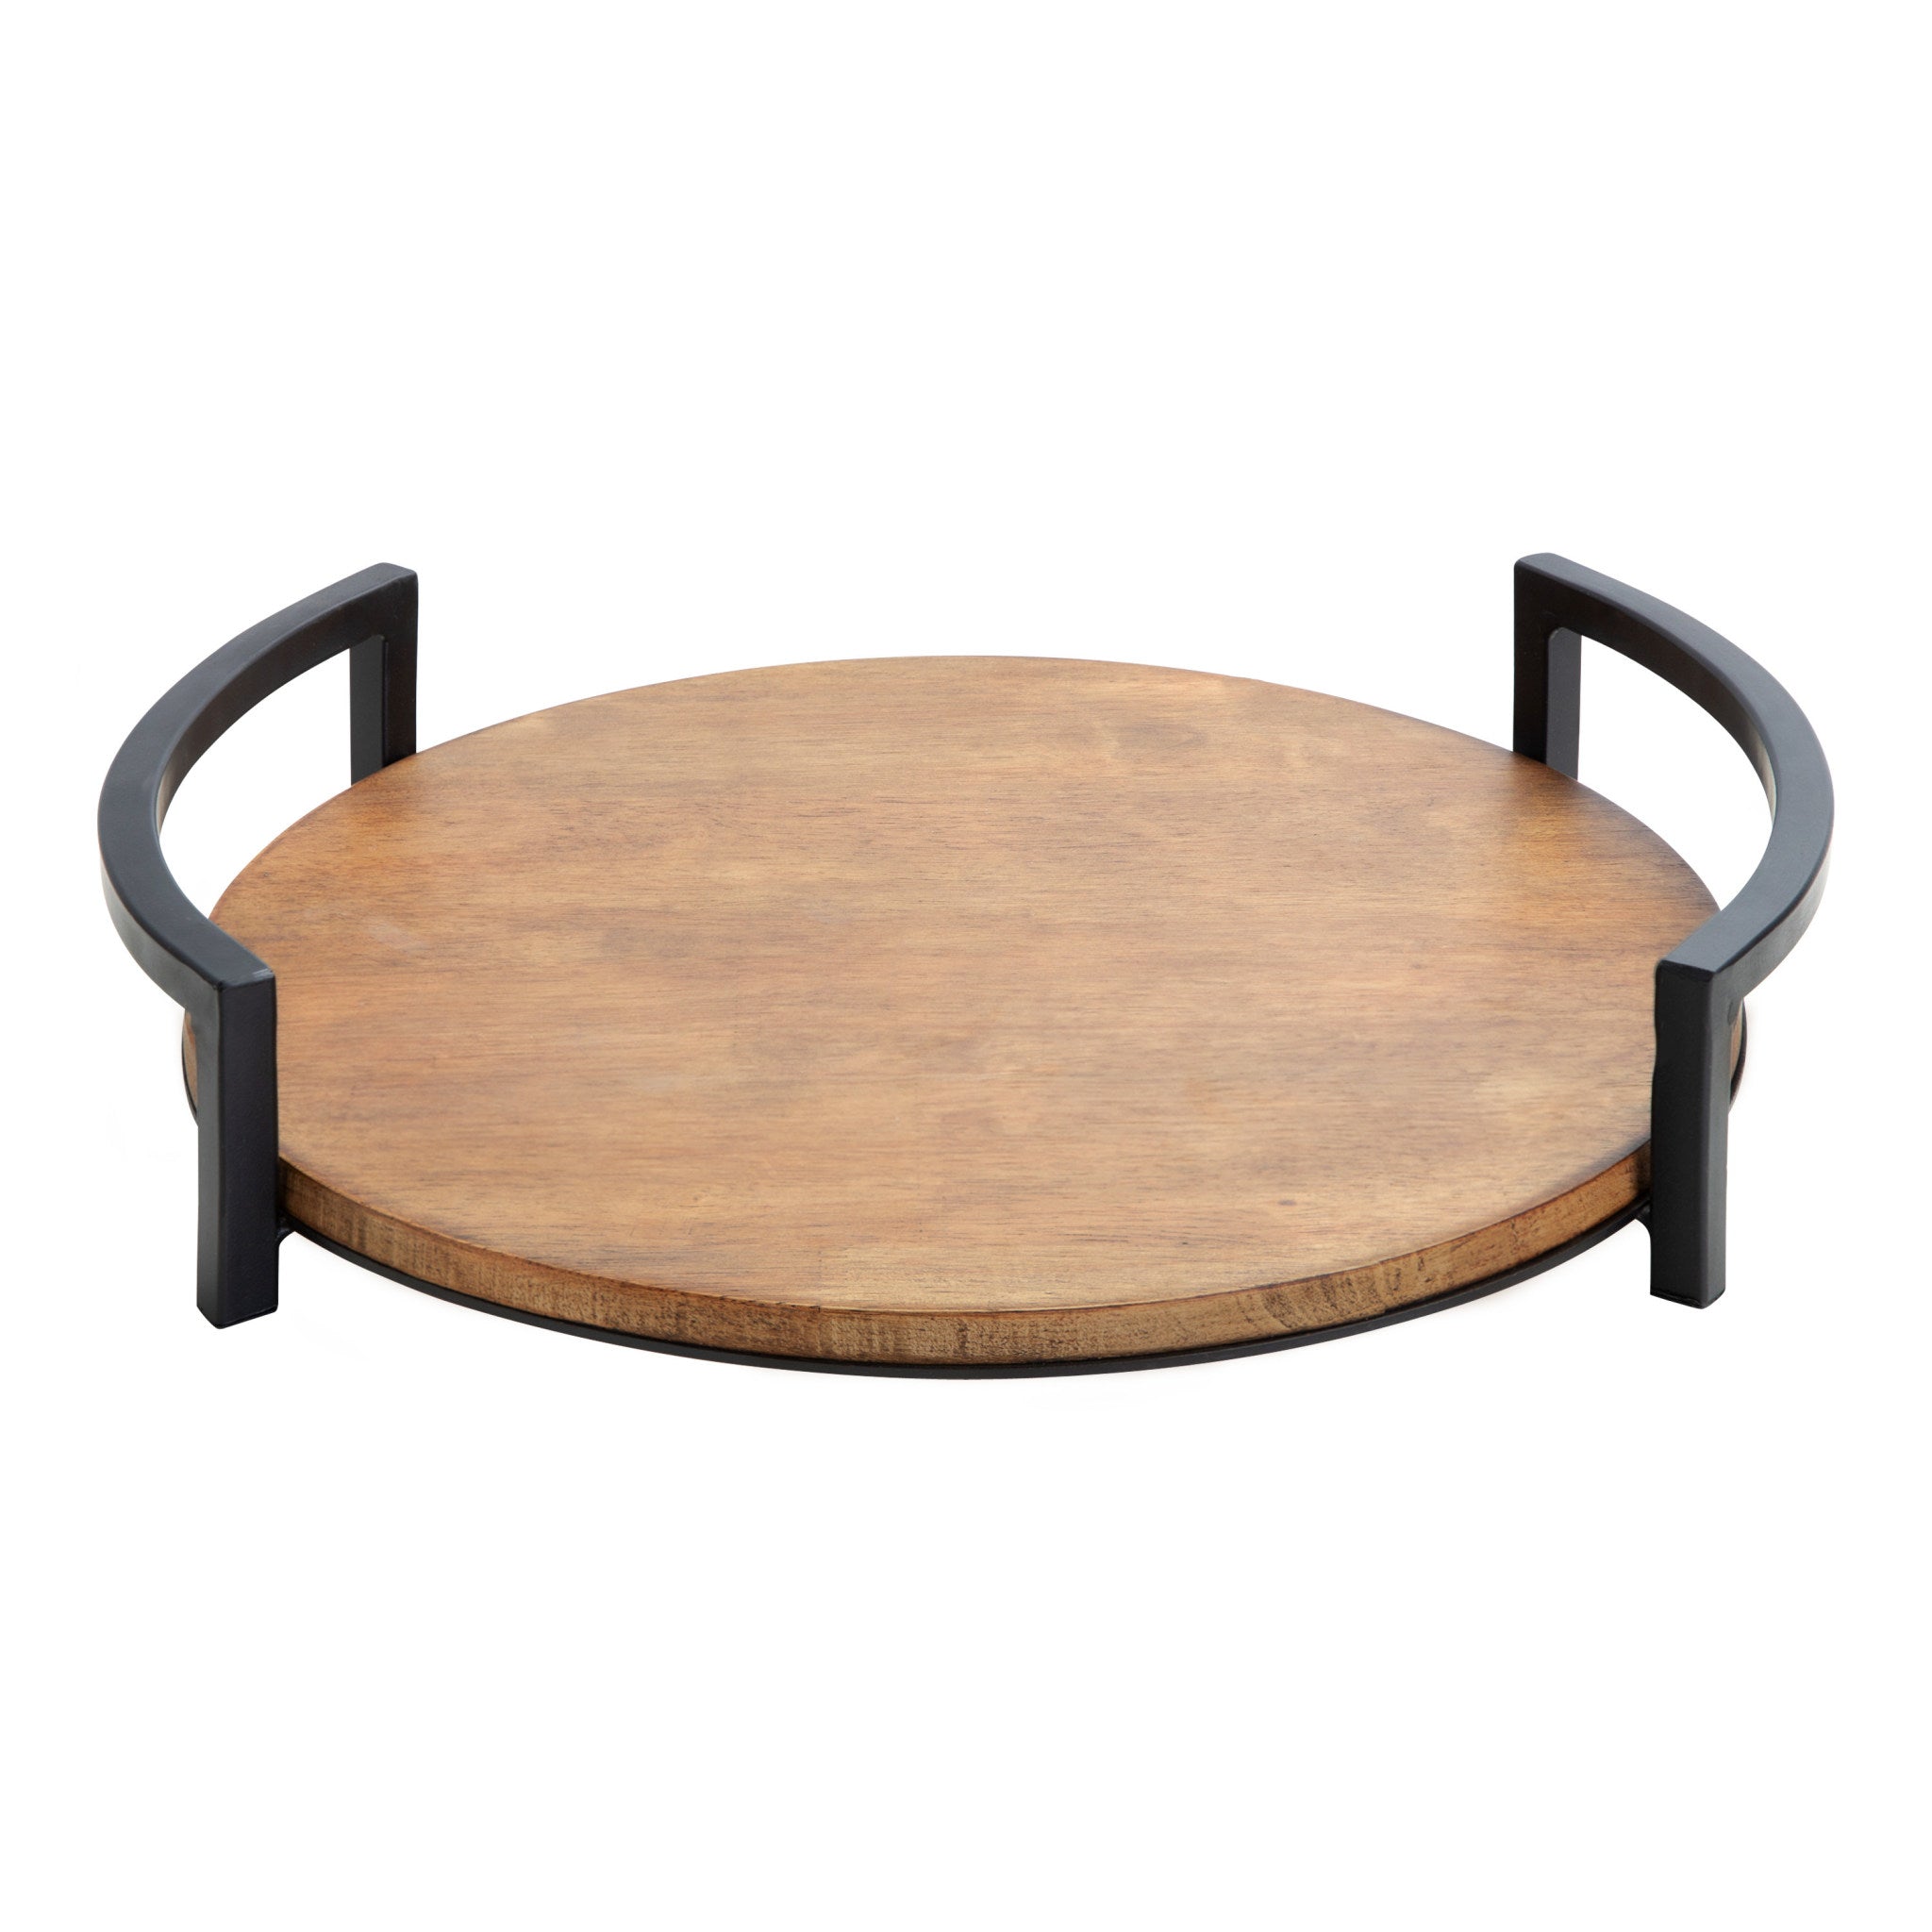 Ficher Wood and Metal Round Decorative Tray